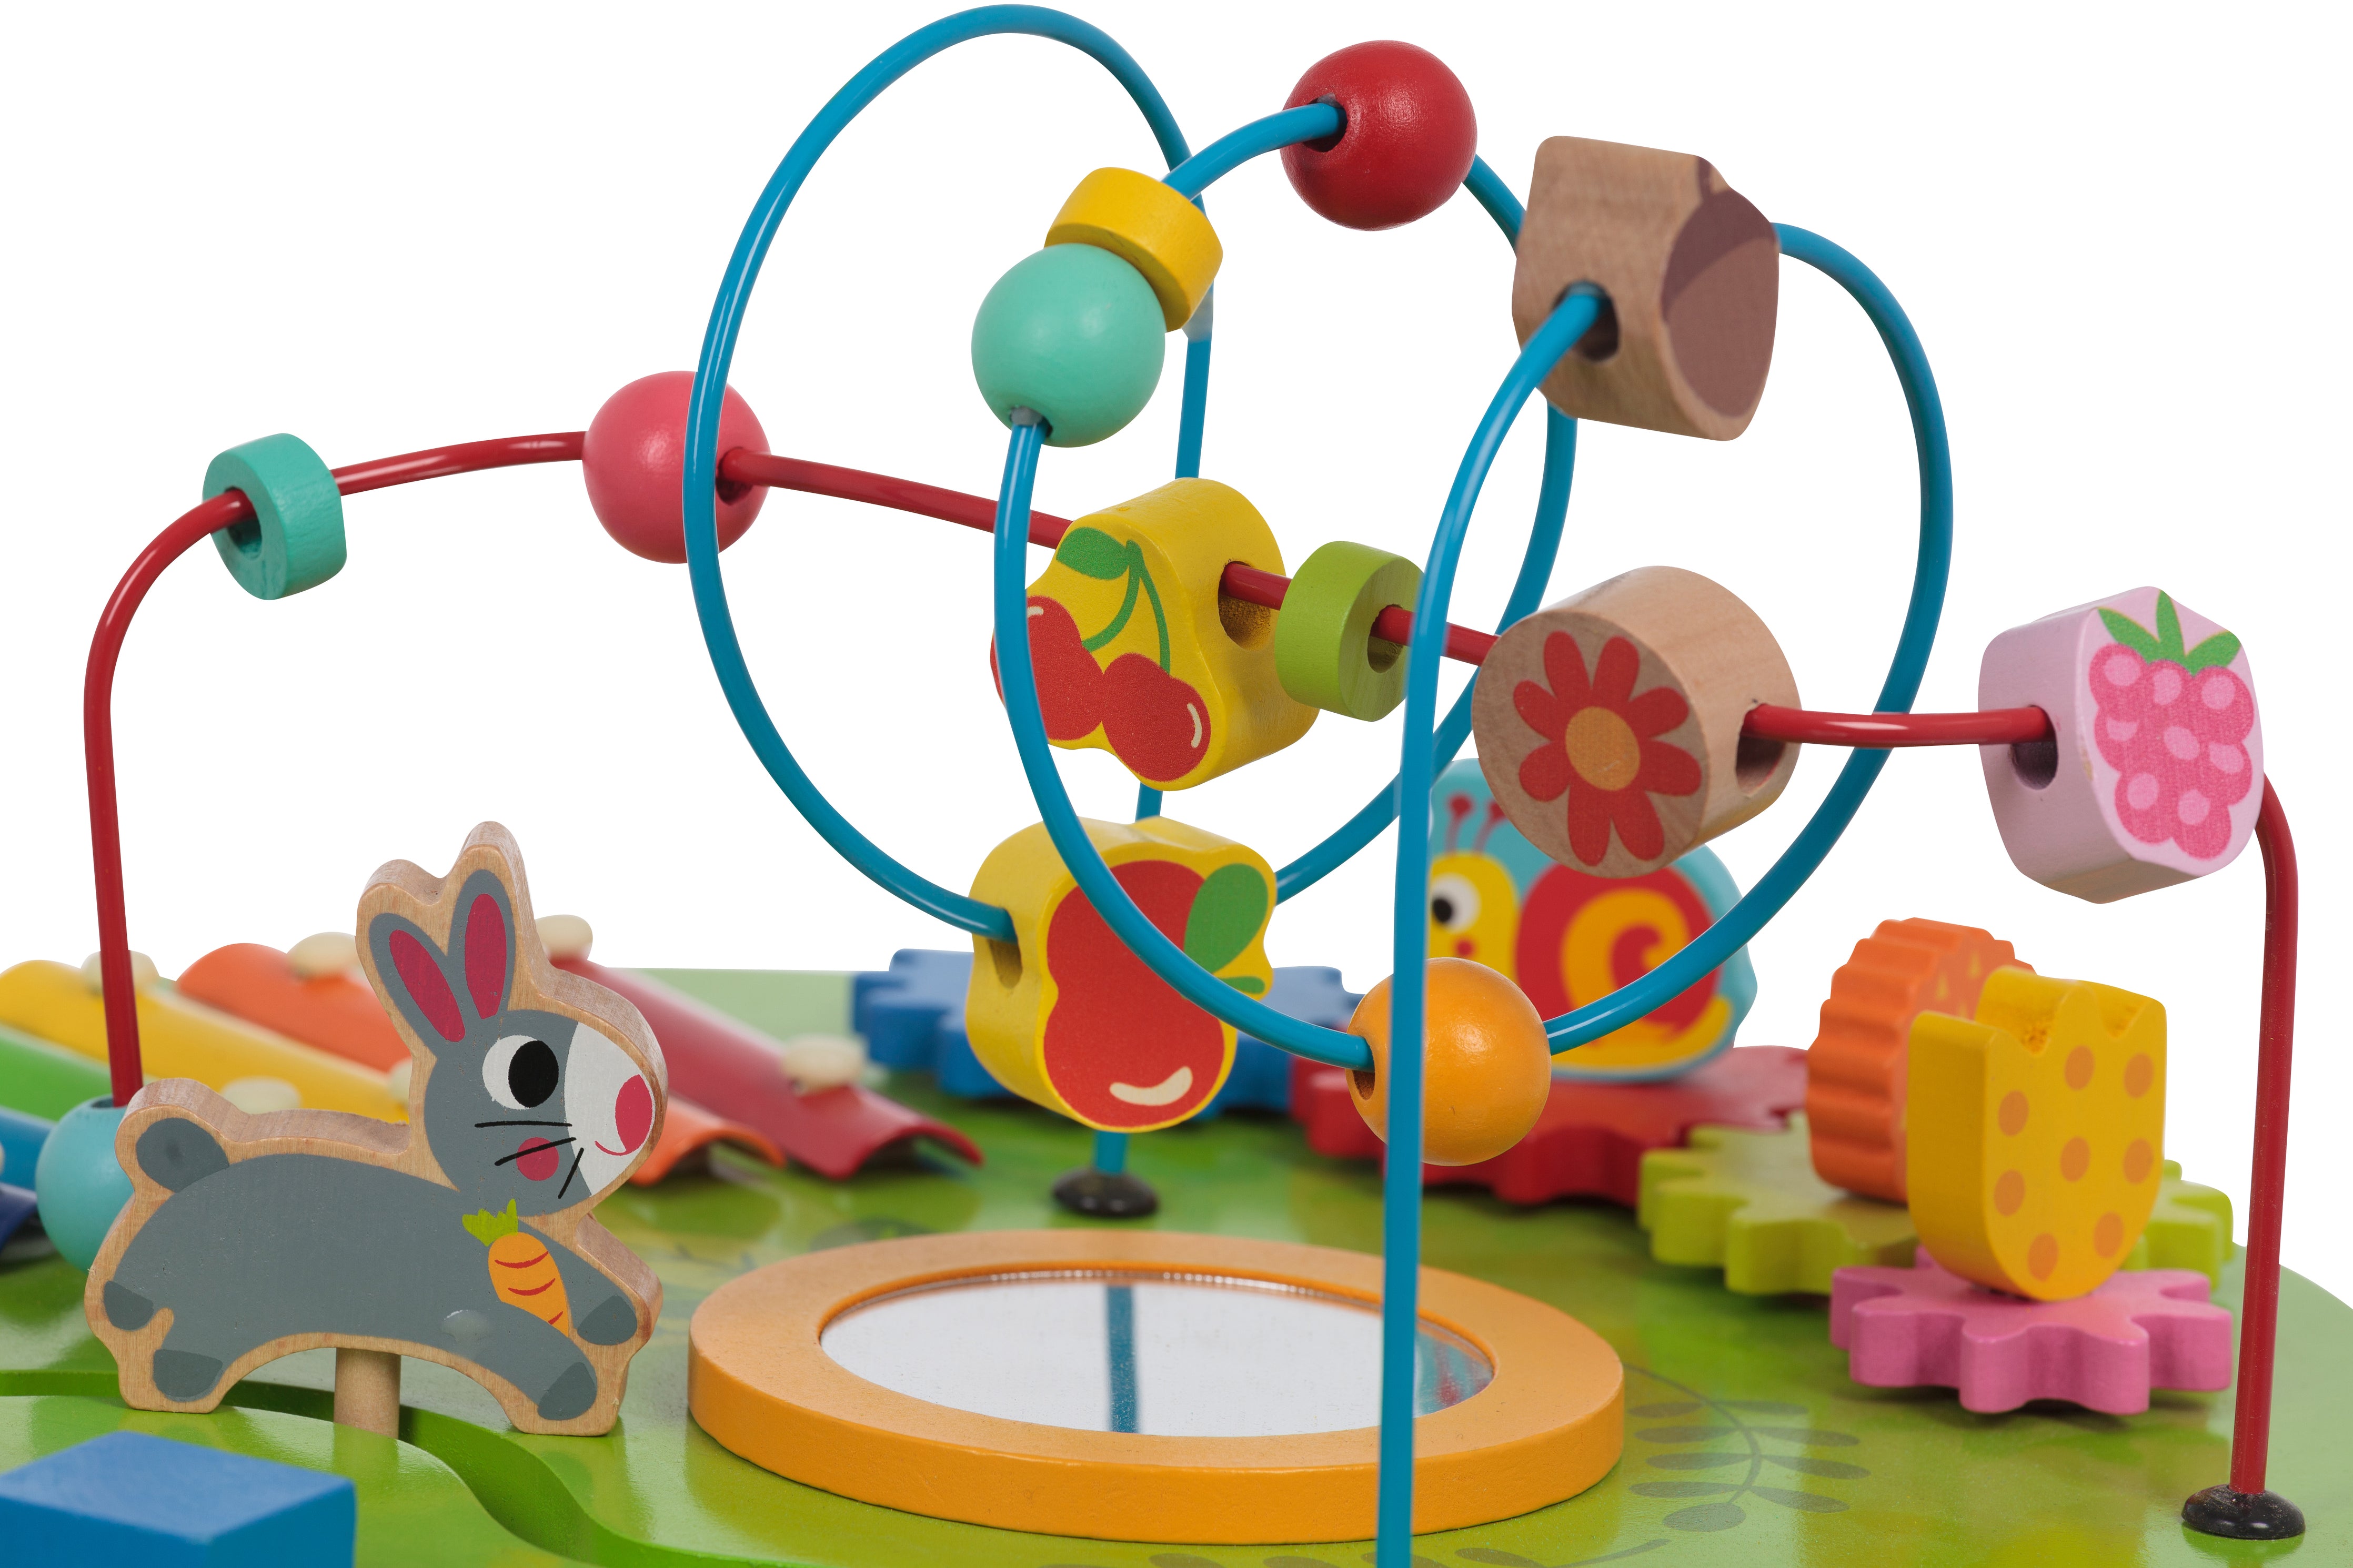 Toyster’s Wooden Activity Table for Toddlers